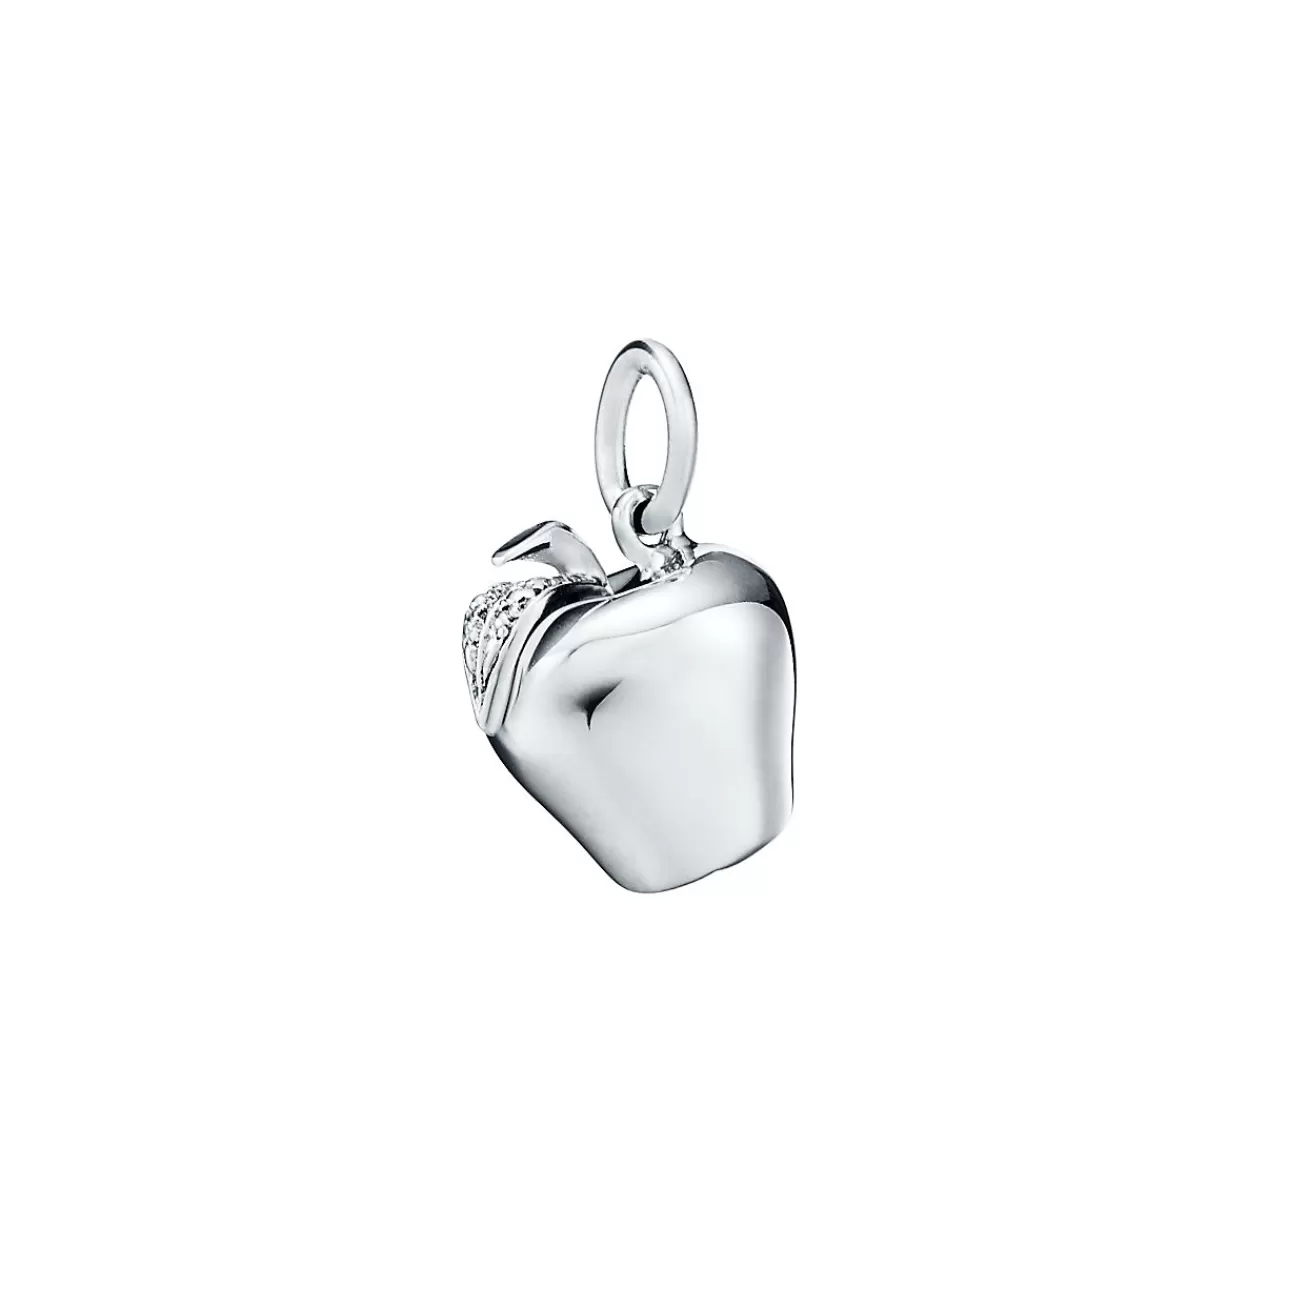 Tiffany & Co. Apple charm in sterling silver on a chain. | ^ Sterling Silver Jewelry